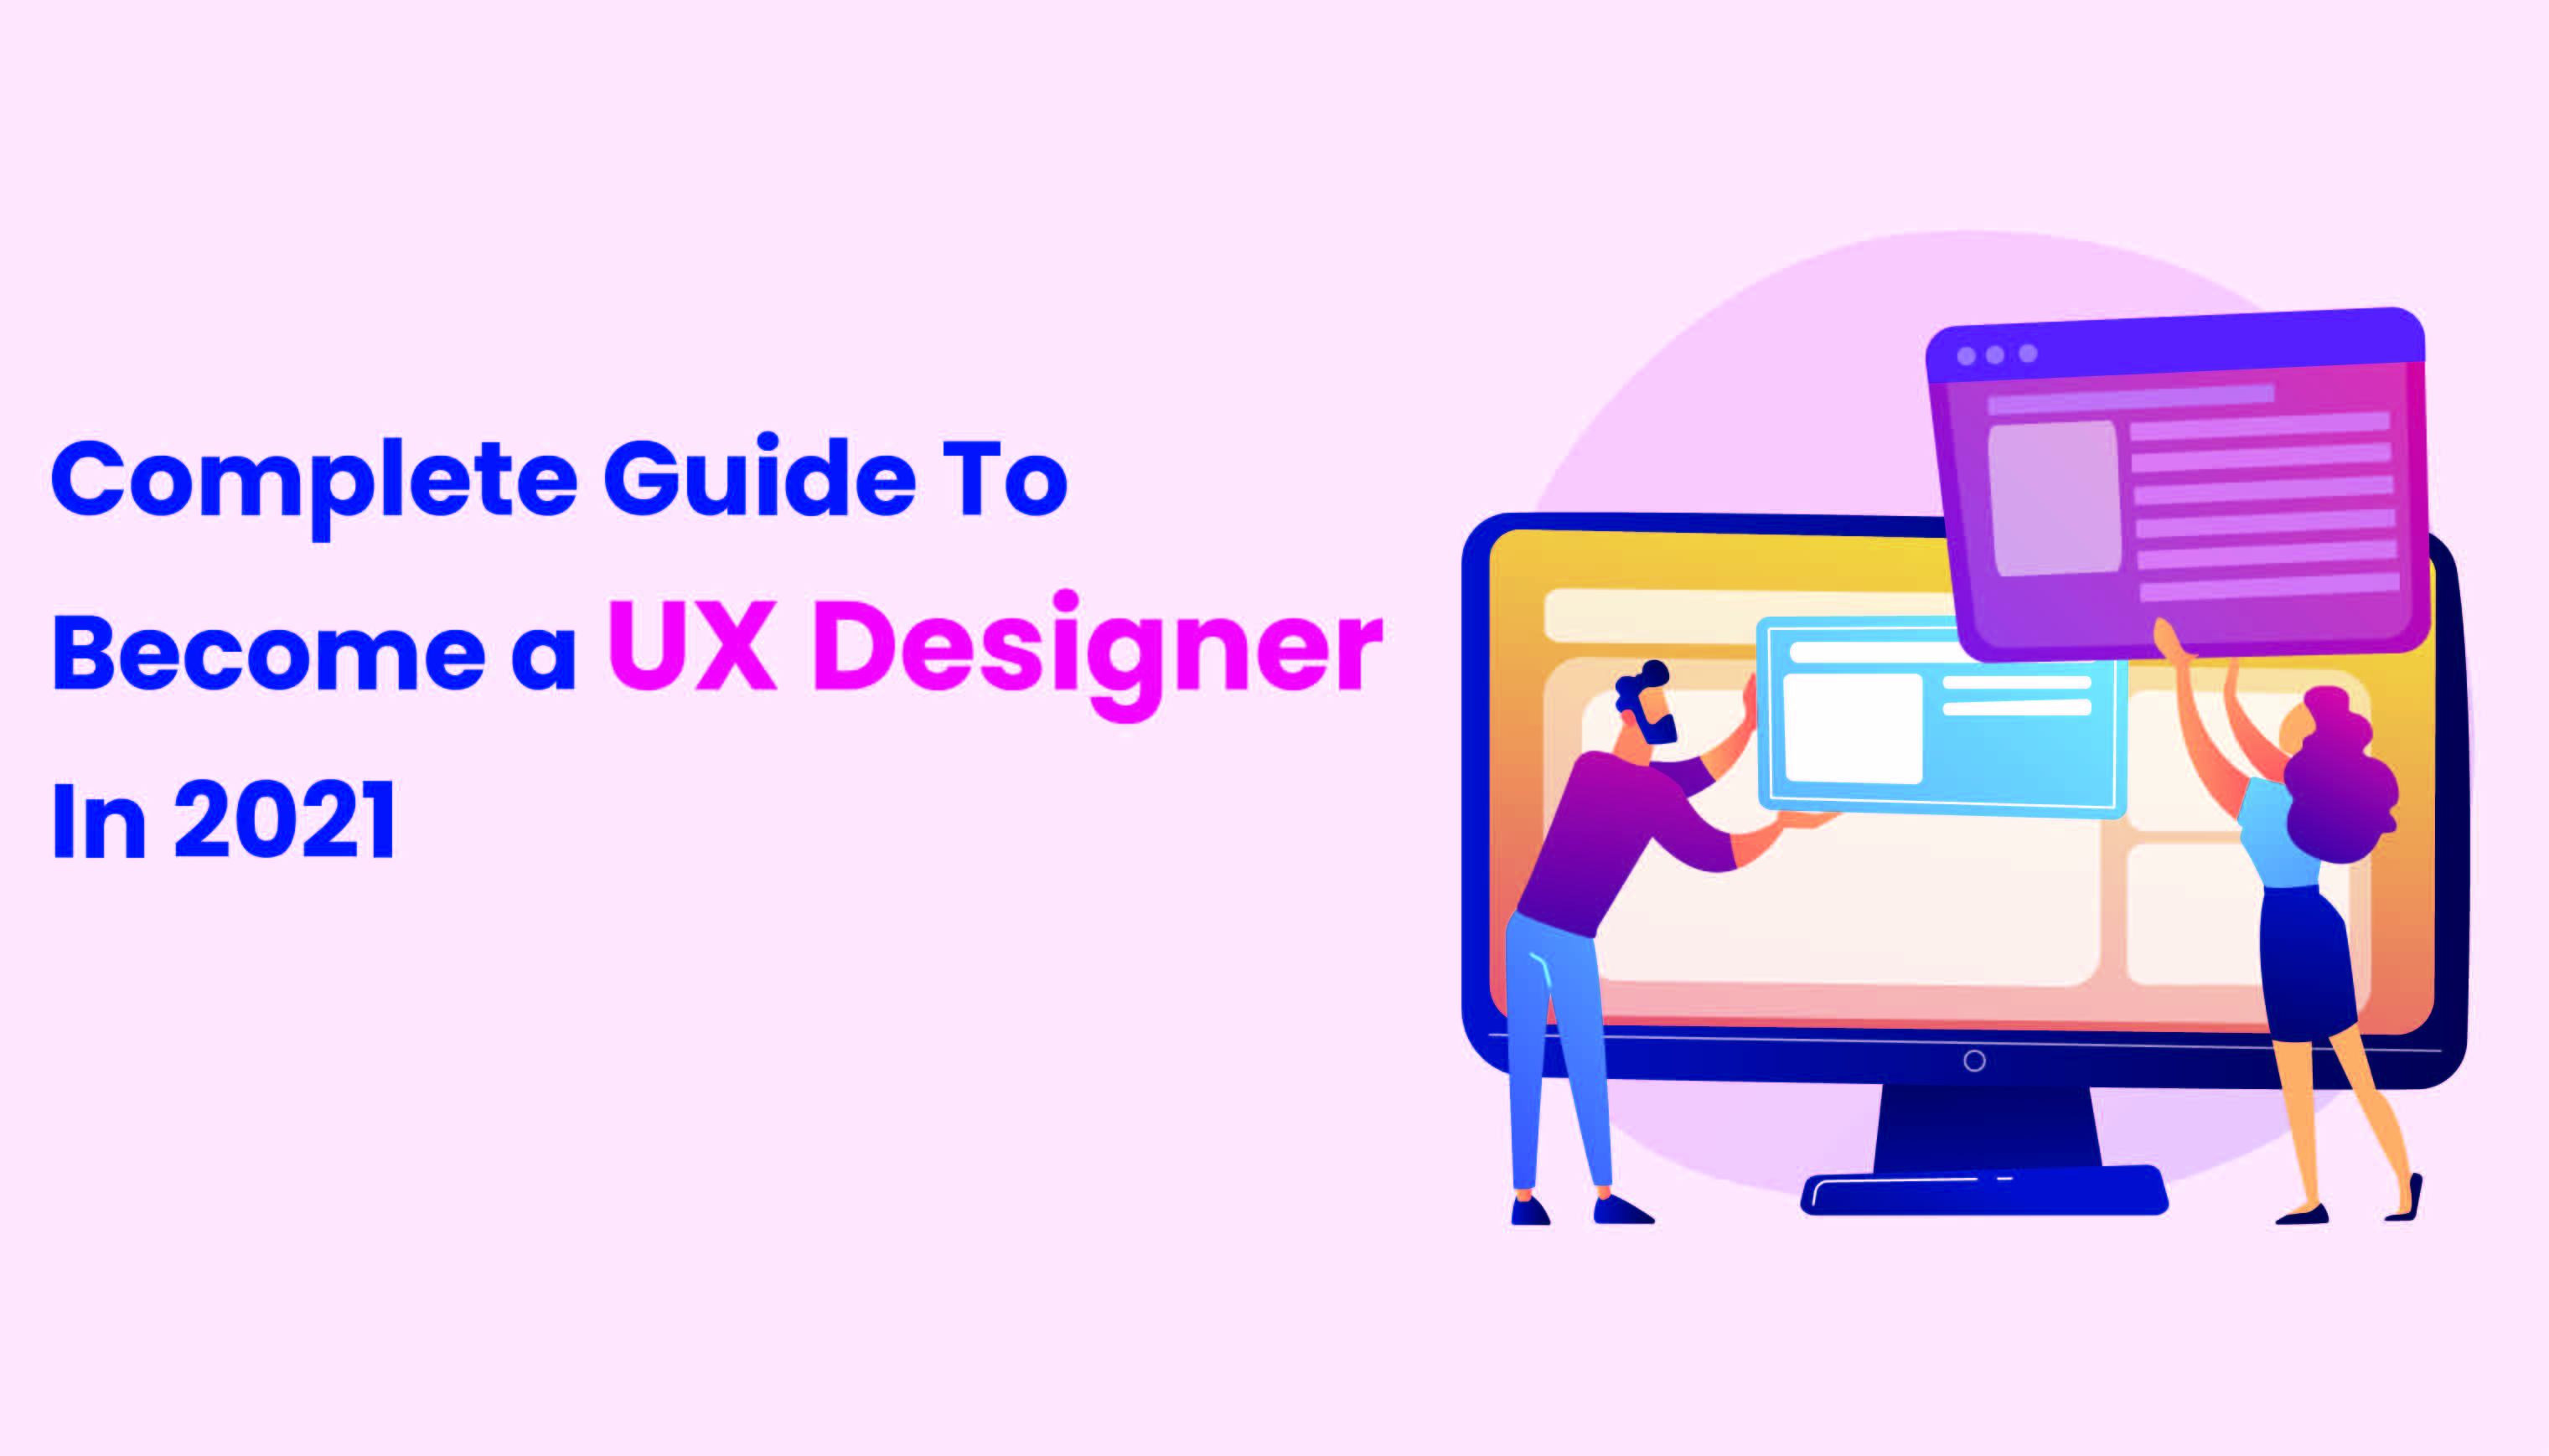 This Is How To Become A UX Designer (2022 Guide)